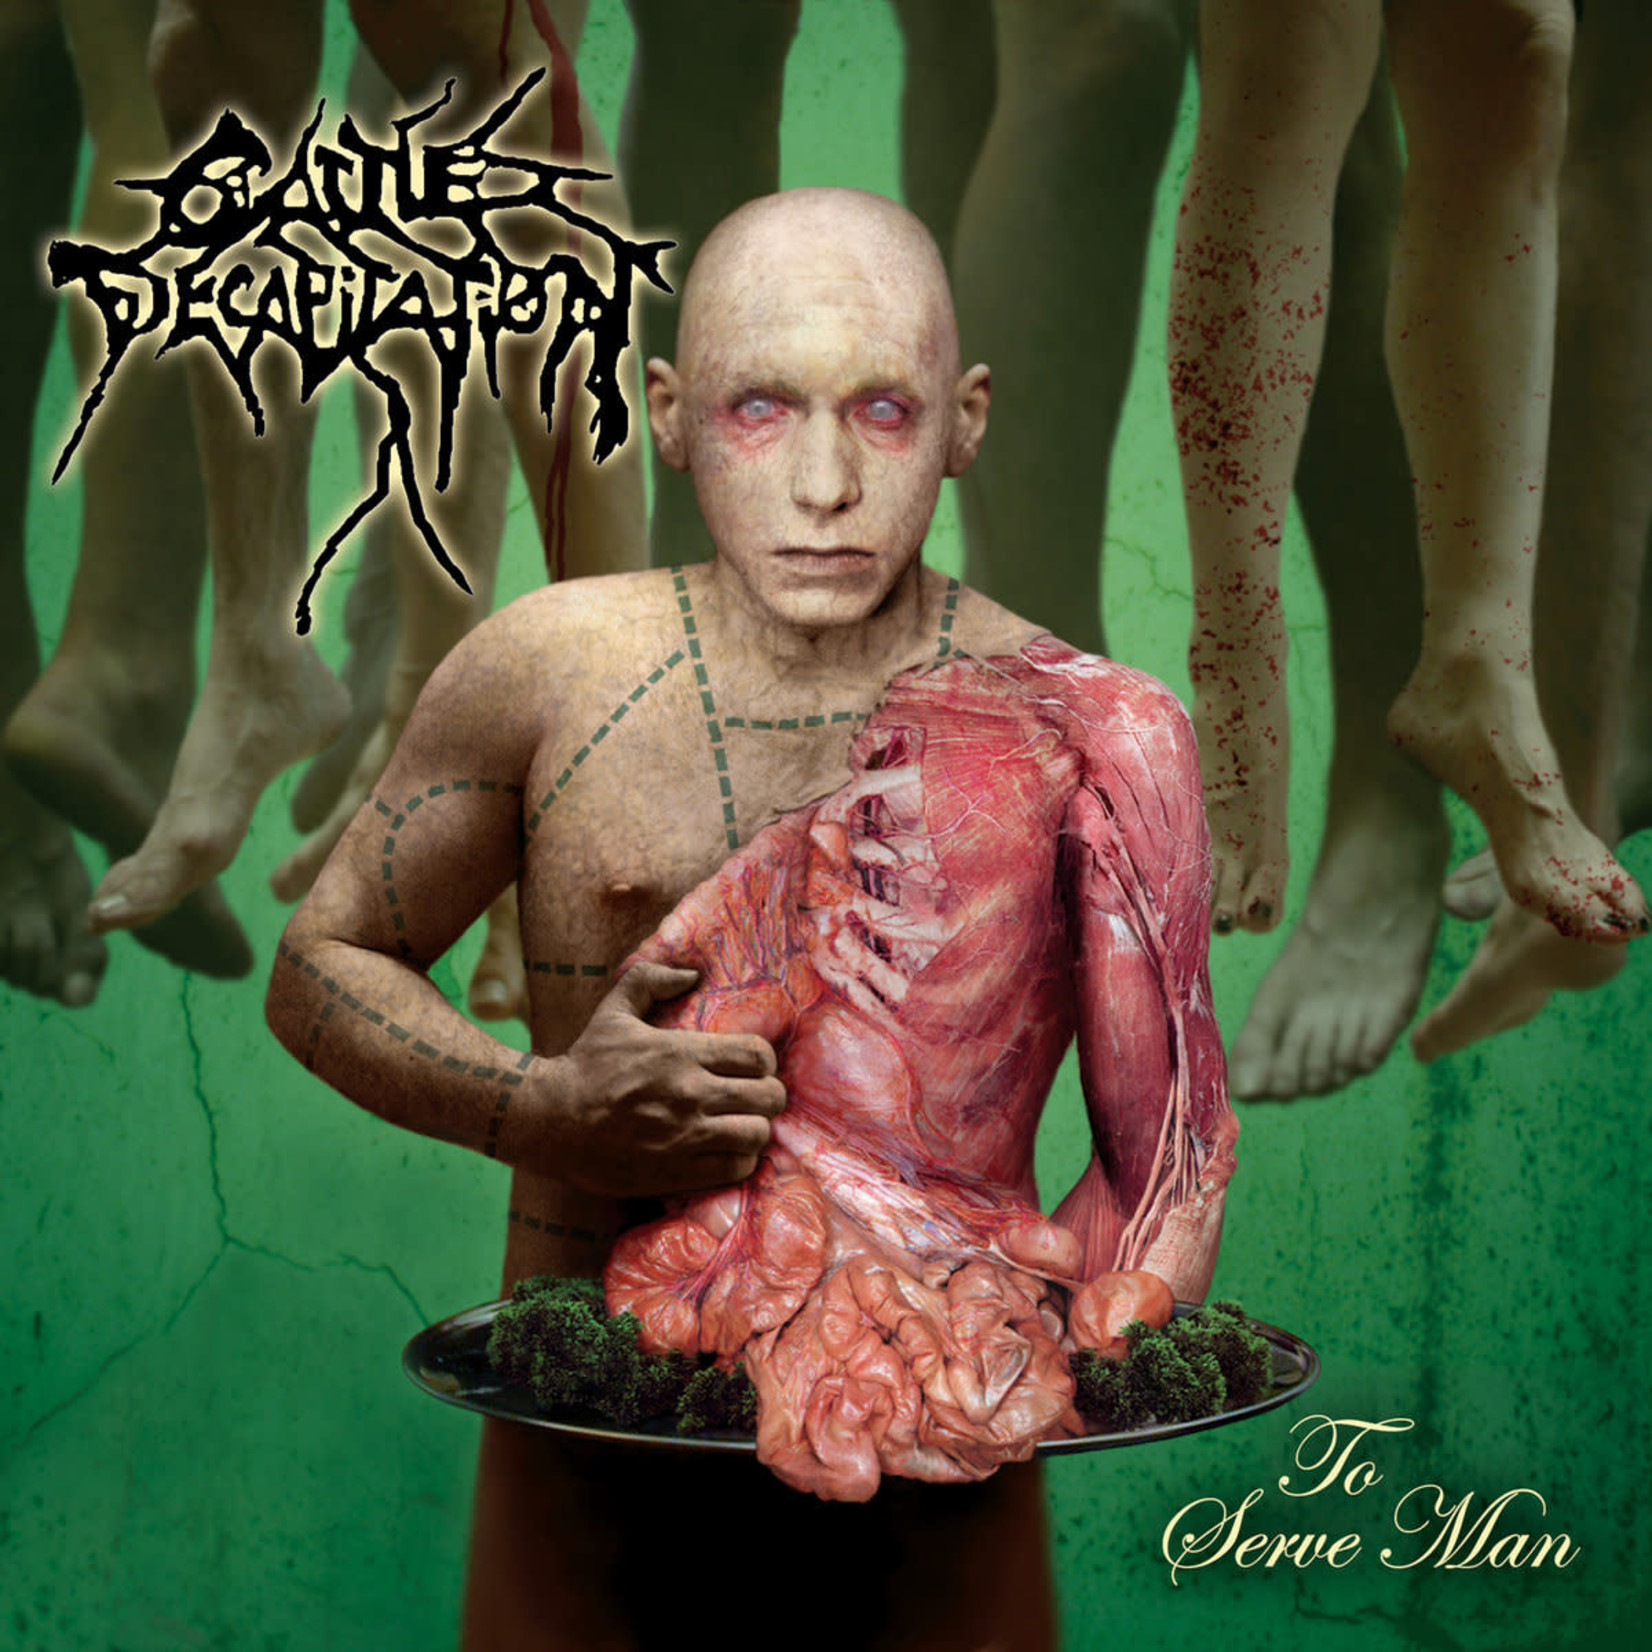 Cattle Decapitation - To Serve Man [CD]